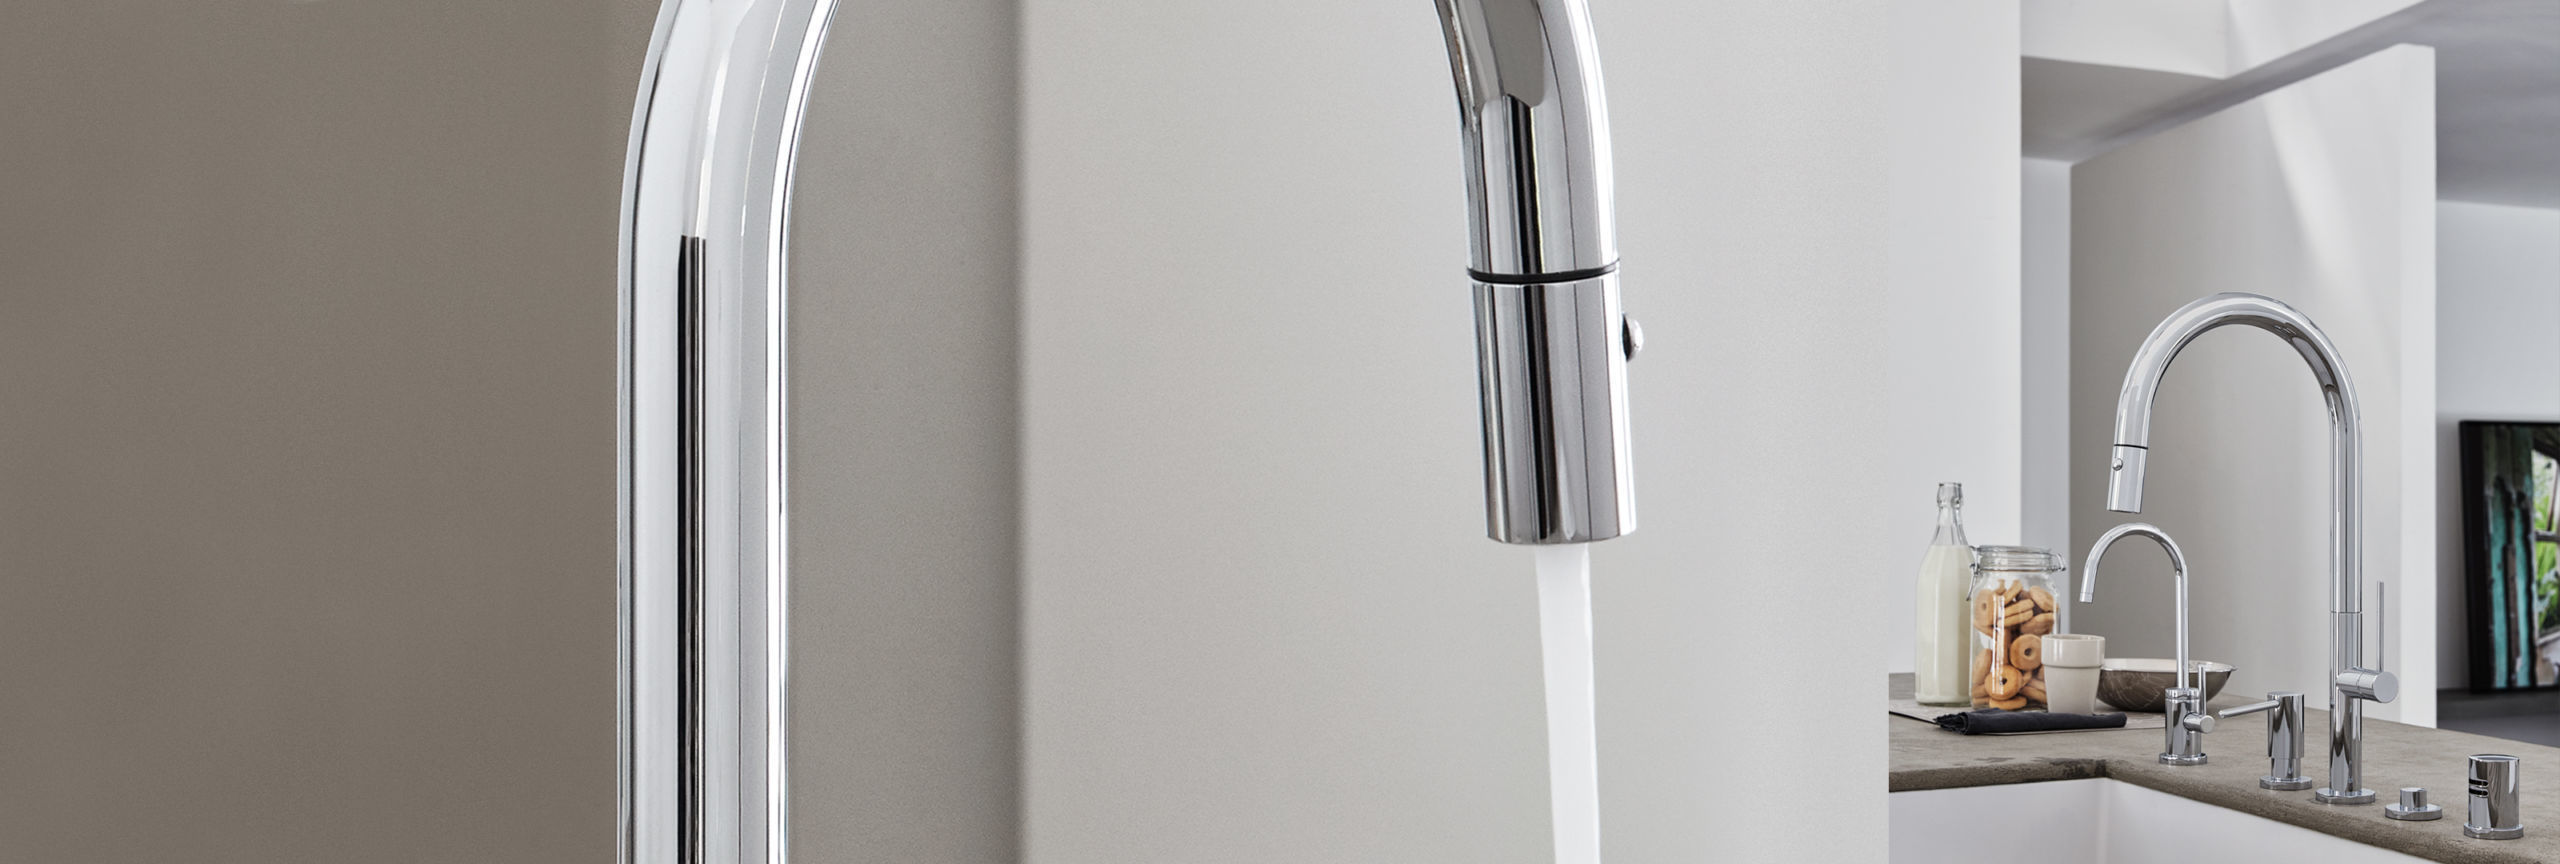 kitchen series poetto faucet close-up and complete ensemble with water dispenser